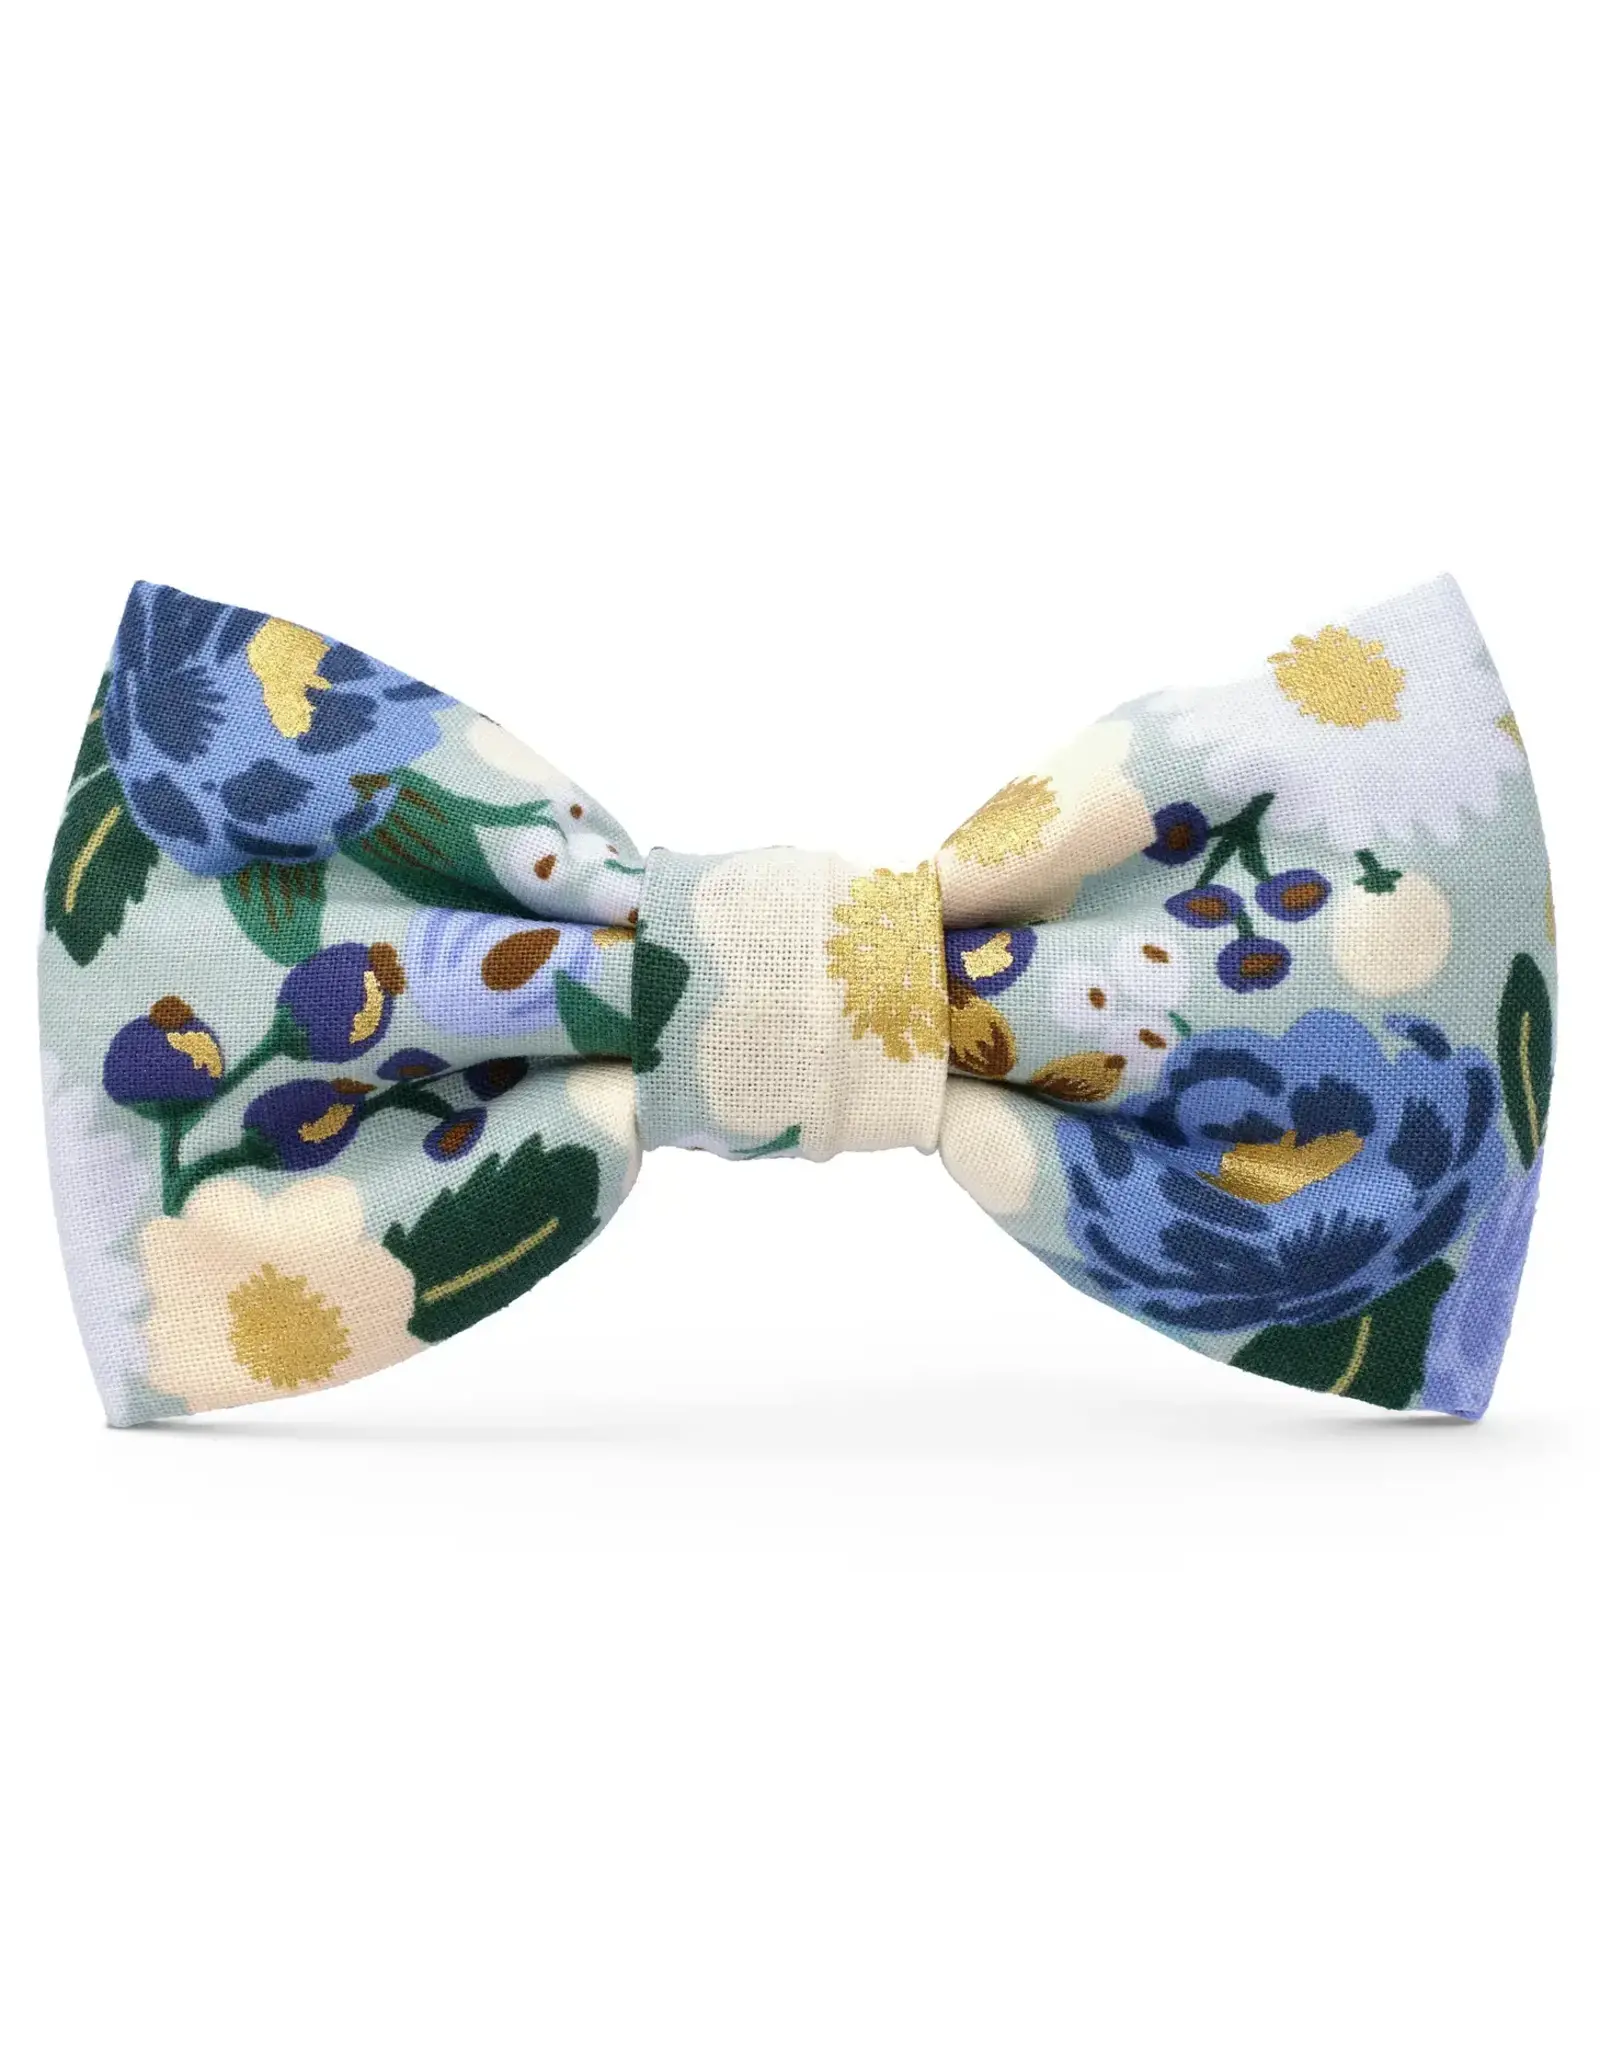 Rifle Paper Co. x TFD Vintage Blossom Spring Dog Bow Tie